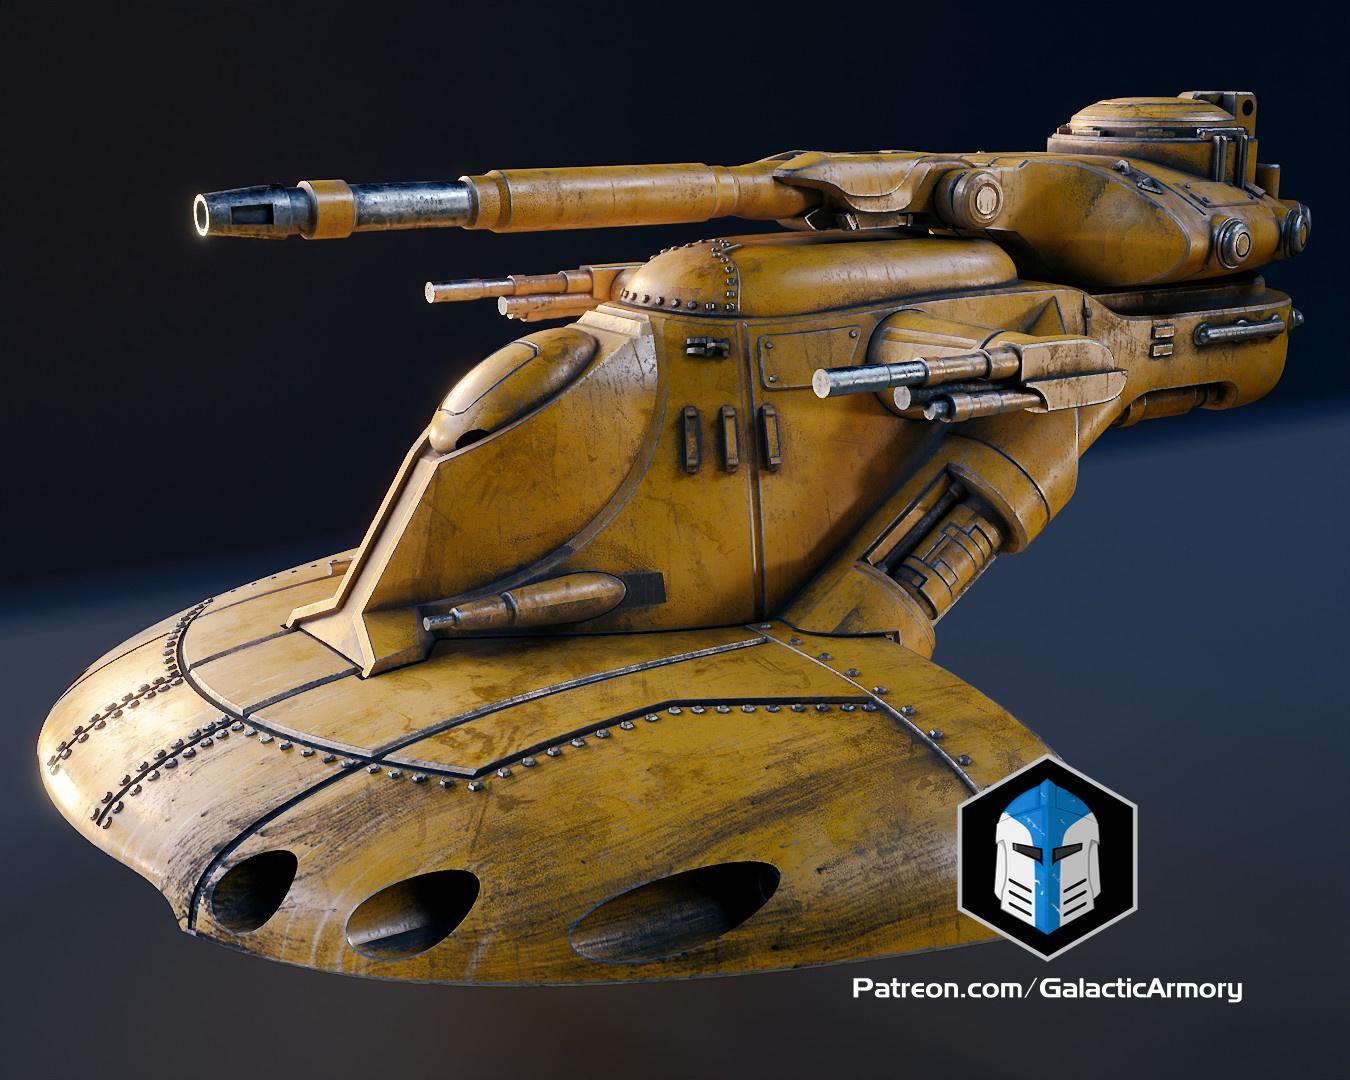 [New Files!] The 1:48 Scale AAT Tank has been added to the February rewards!